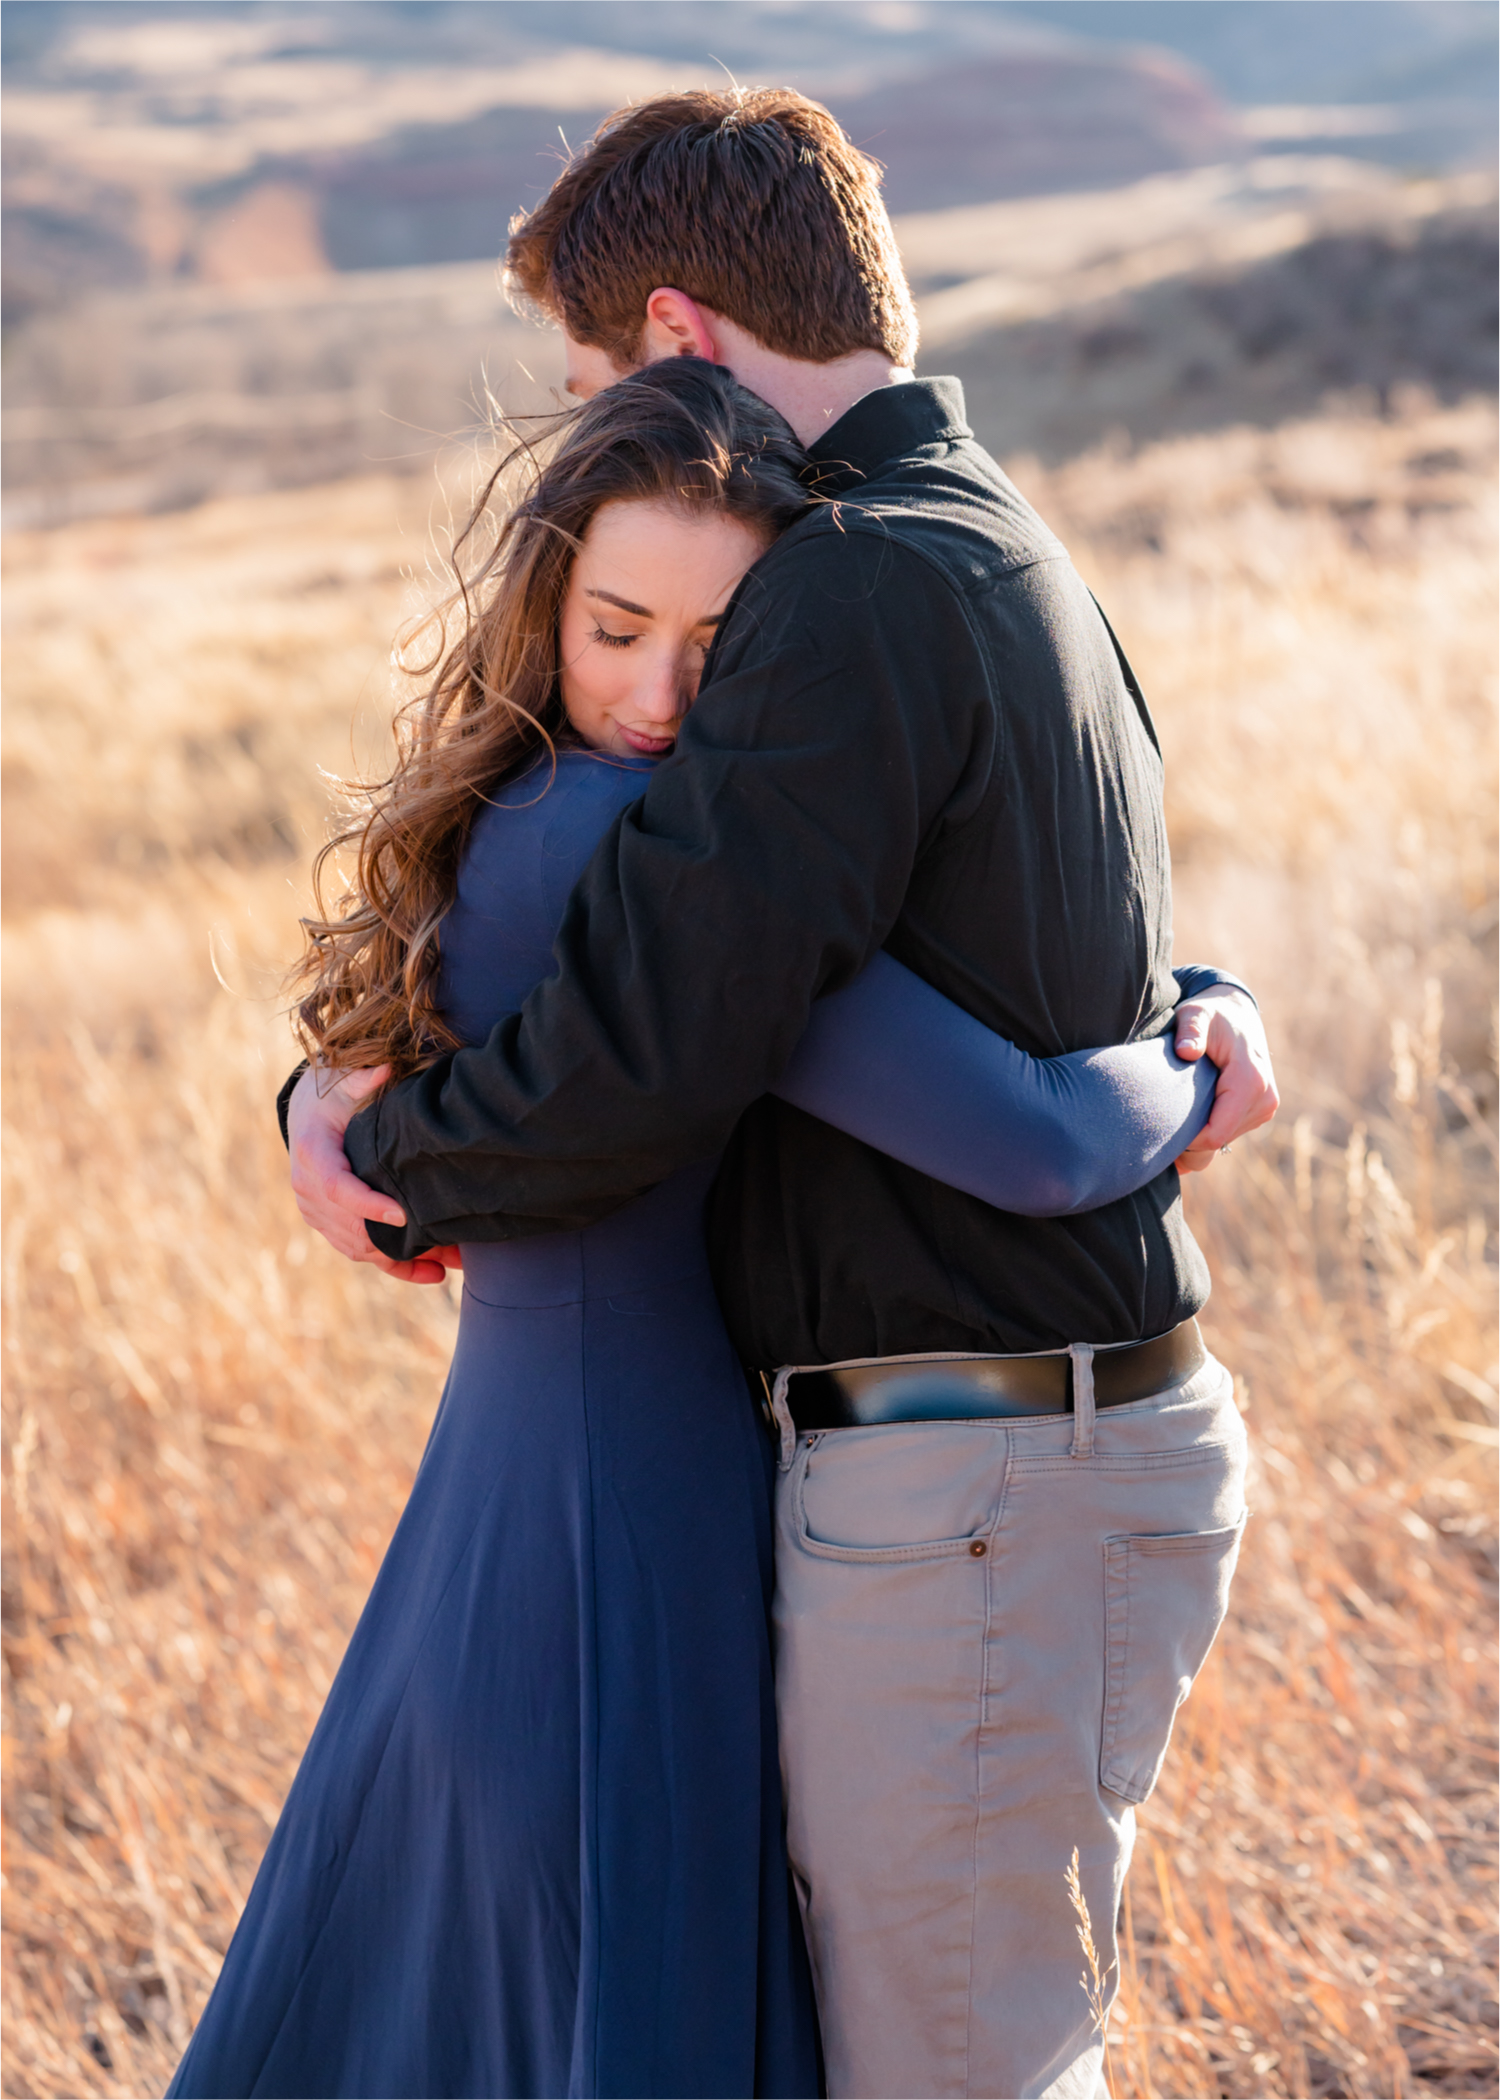 Rocky Mountain Winter Engagement in Colorado | Britni Girard Photography | Husband and Wife Photography and Cinematography Team | Winter Coats and hikes along hall ranch in Lyons, CO | Silly and Romantic